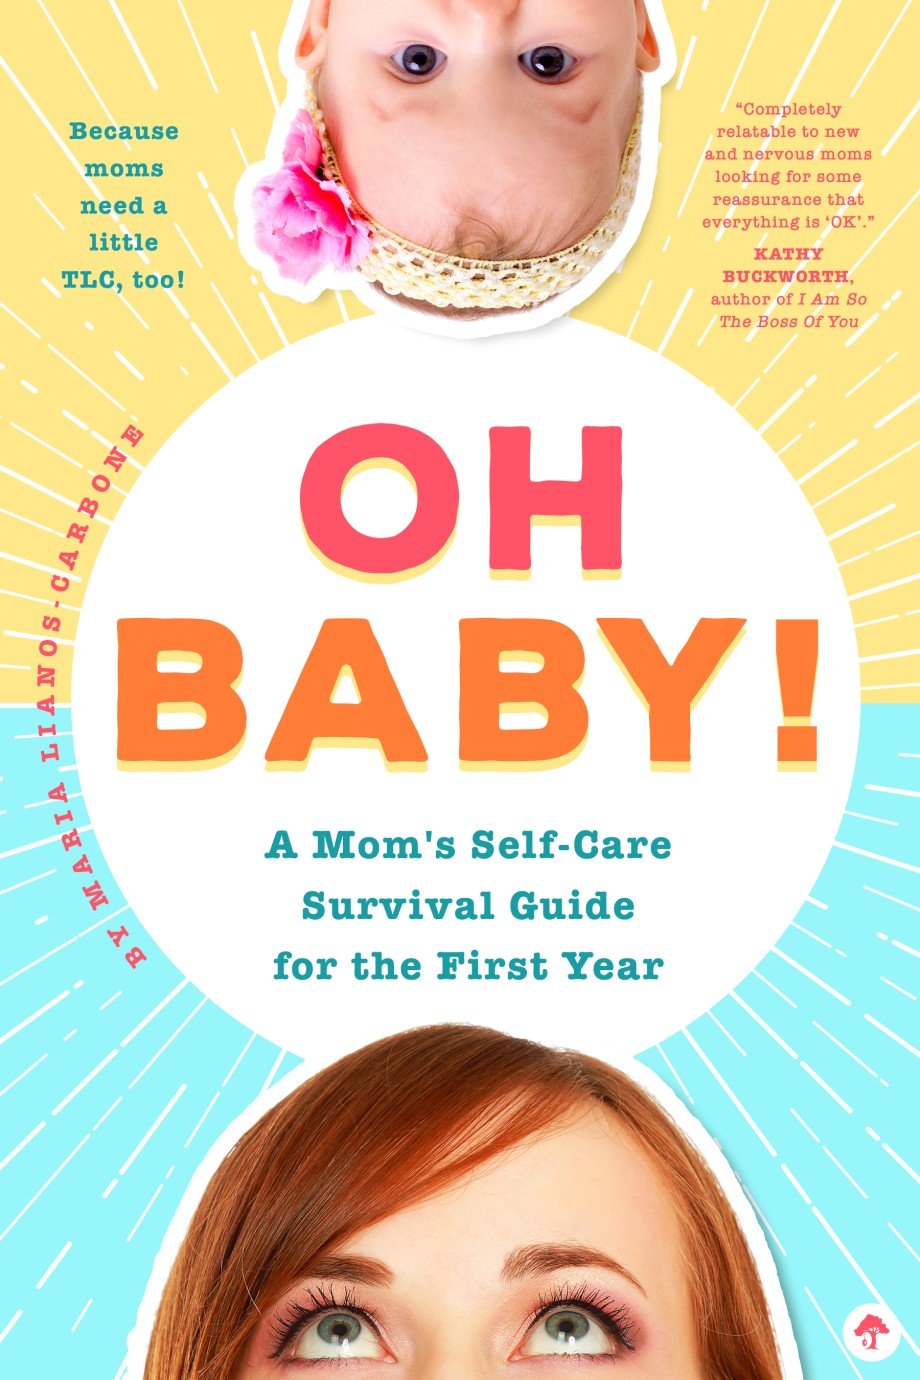 Oh Baby! A Mom's Self-Care Survival Guide for the First Year Because Moms Need a Little TLC, Too!